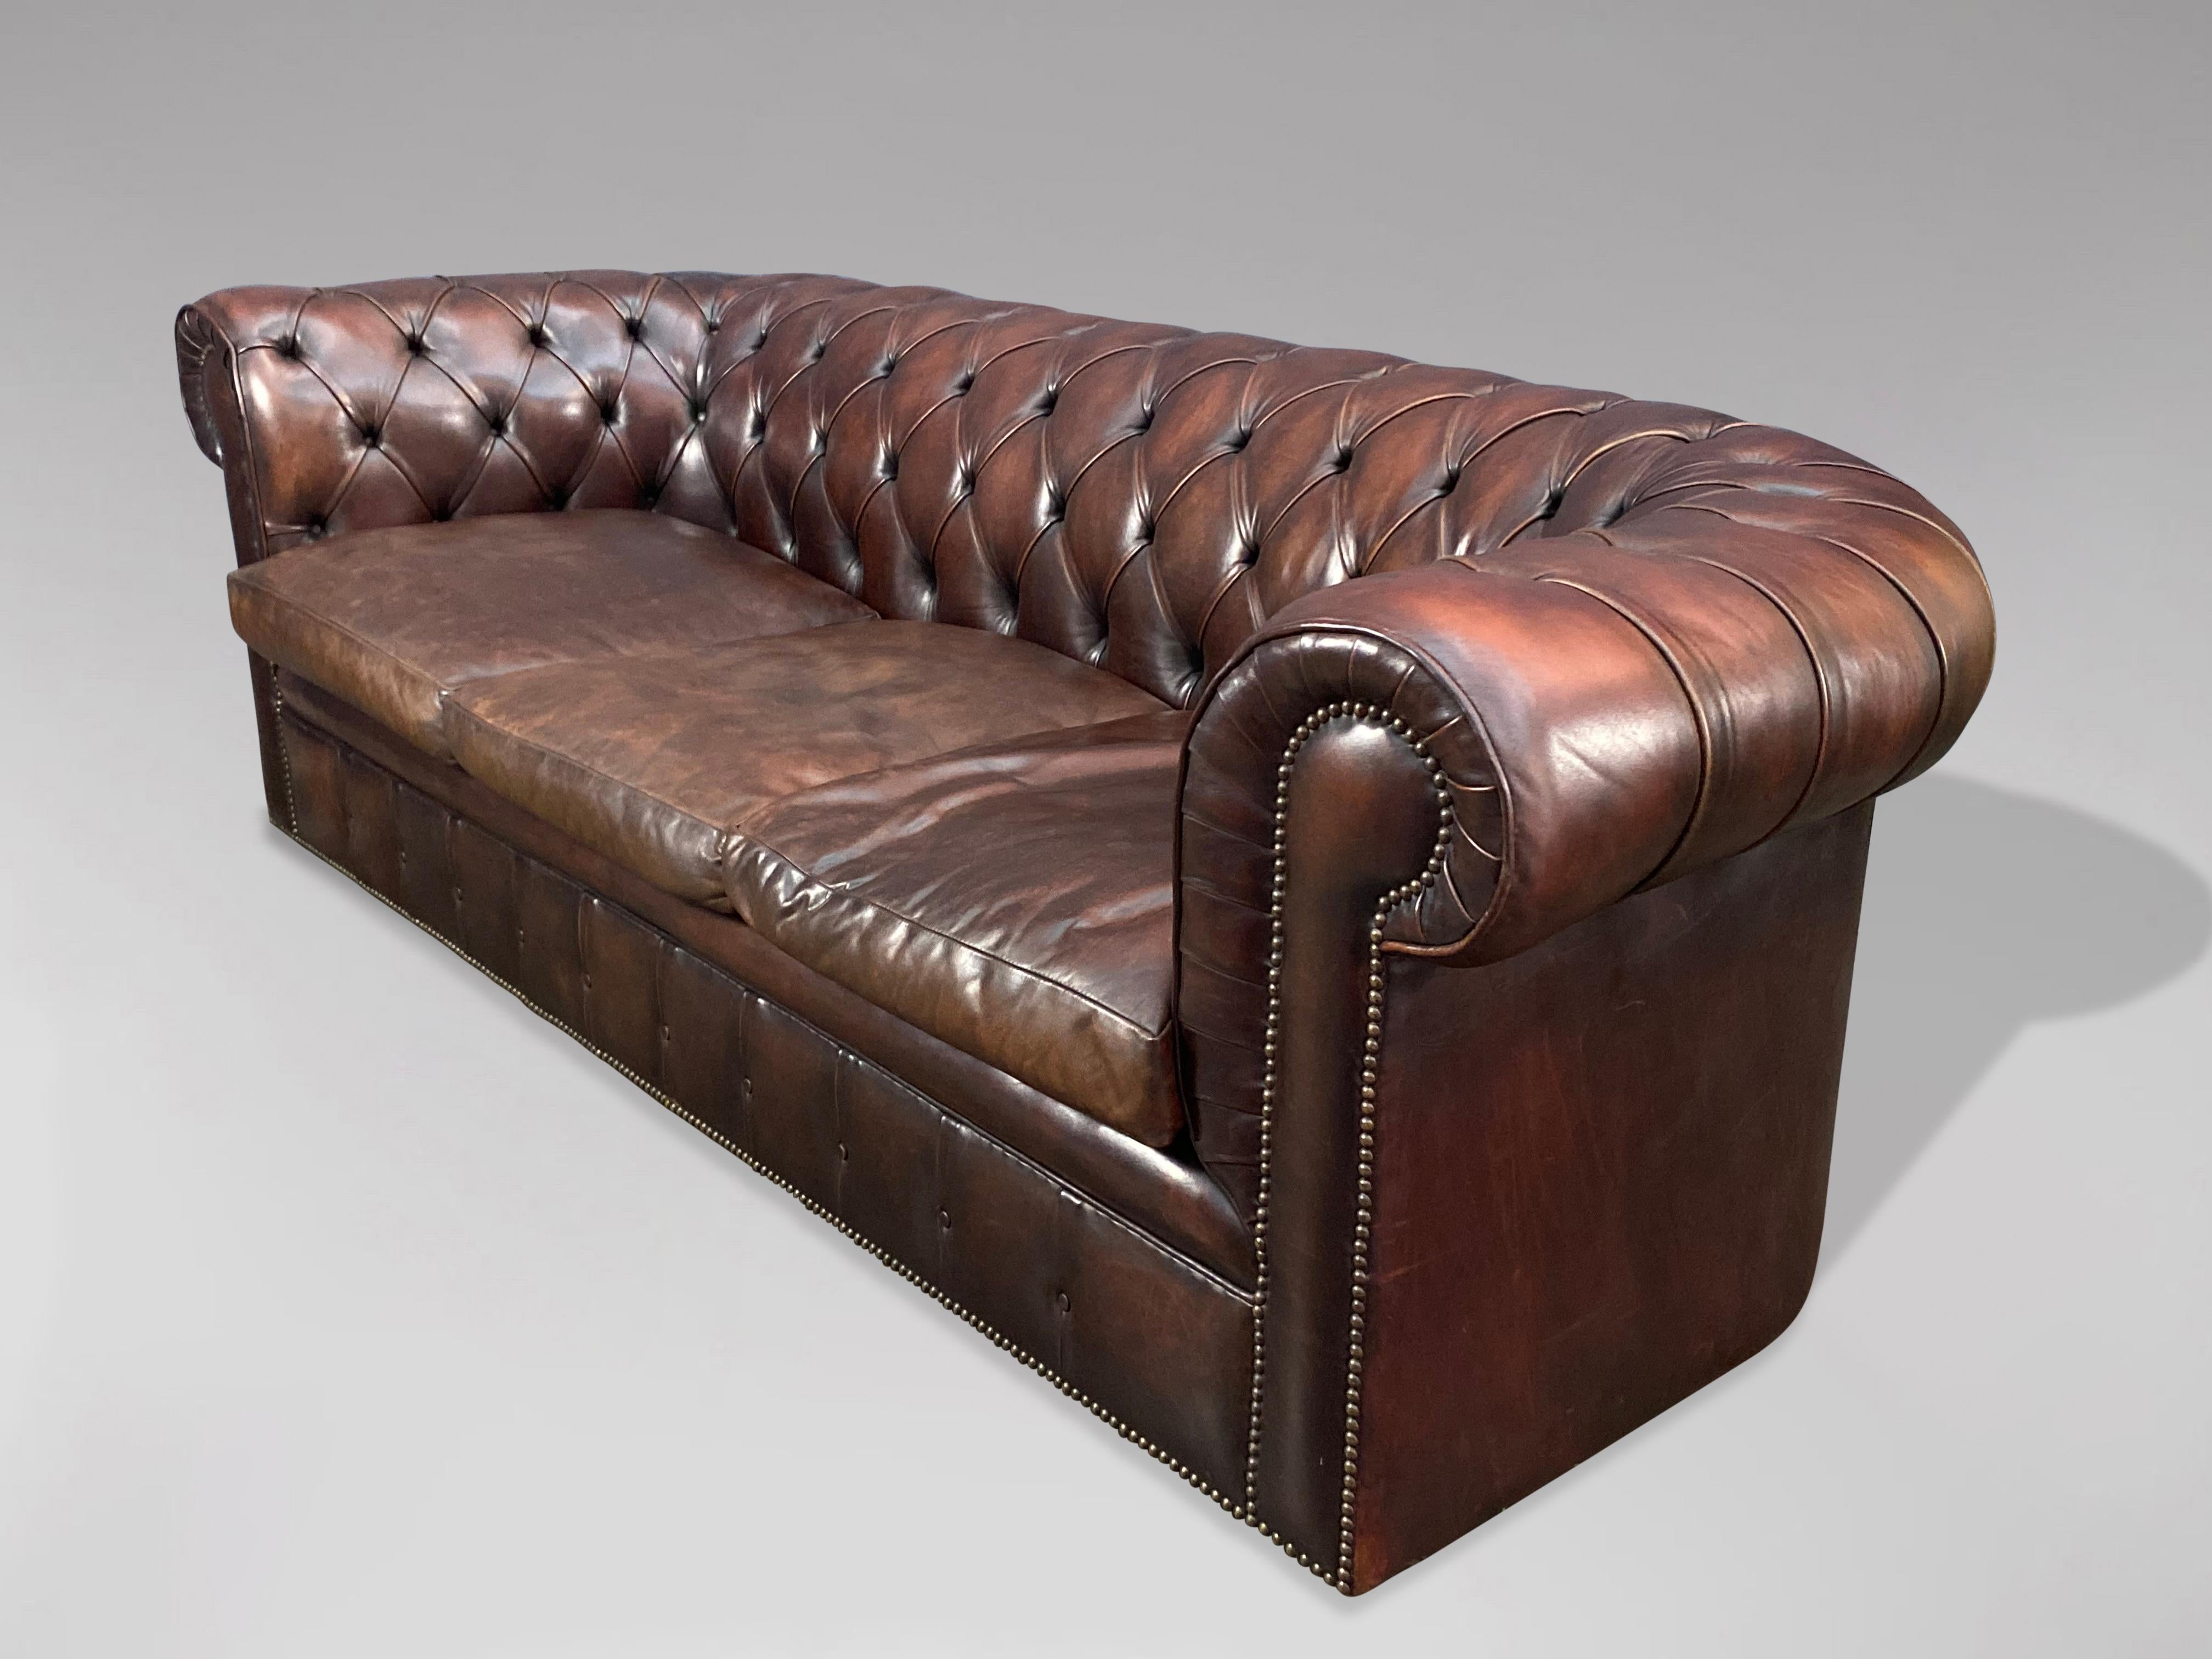 British 20th Century Brown Leather Three Seater Chesterfield Sofa